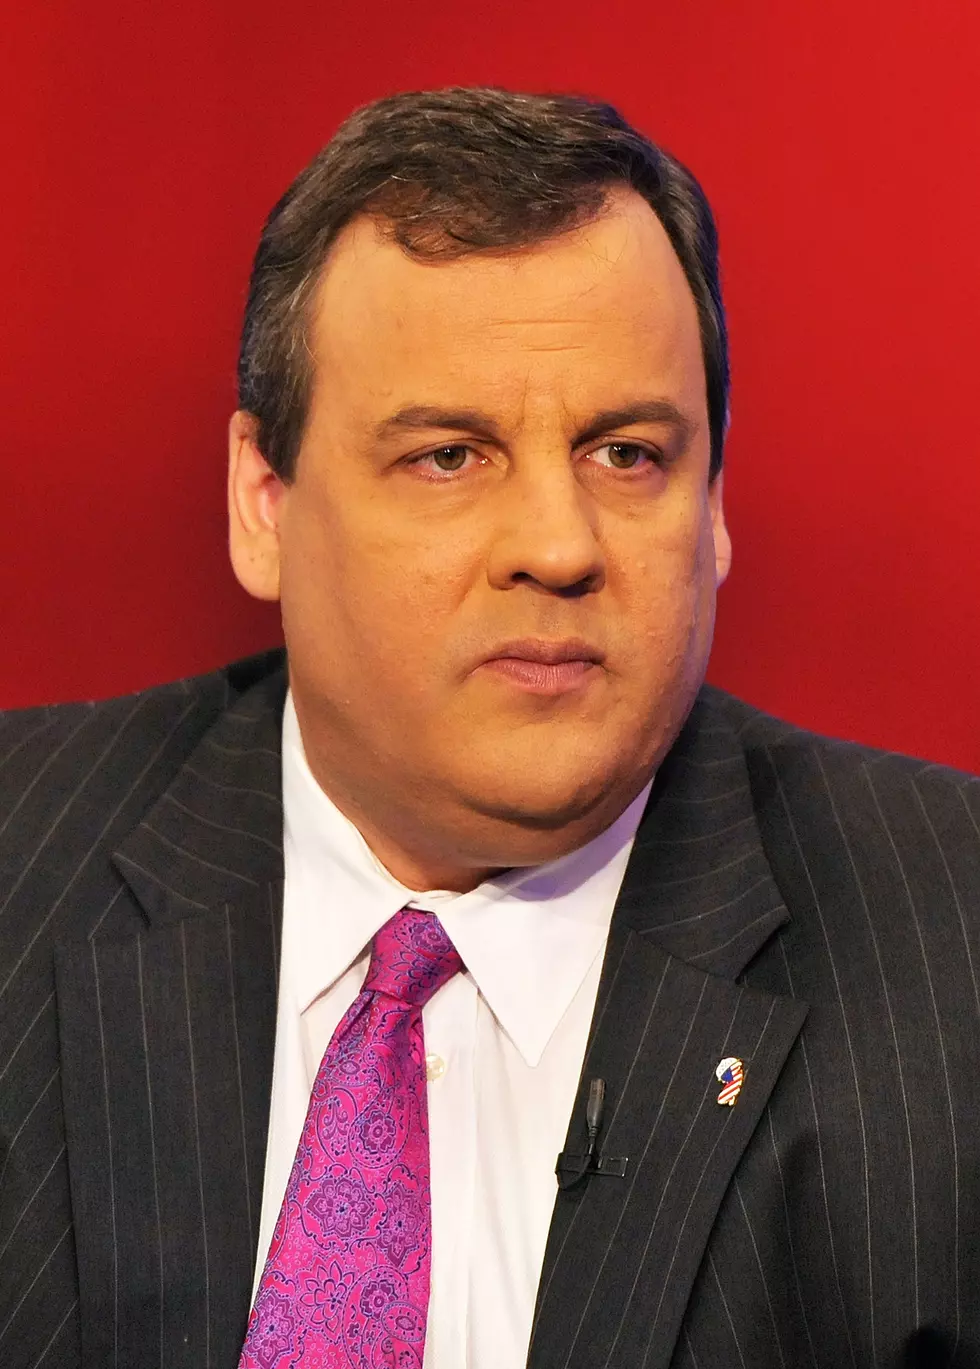 Suprise! Chris Christie Isn’t Running for President, Should America Suspend Elections? and More in Chad’s Steaming Pile